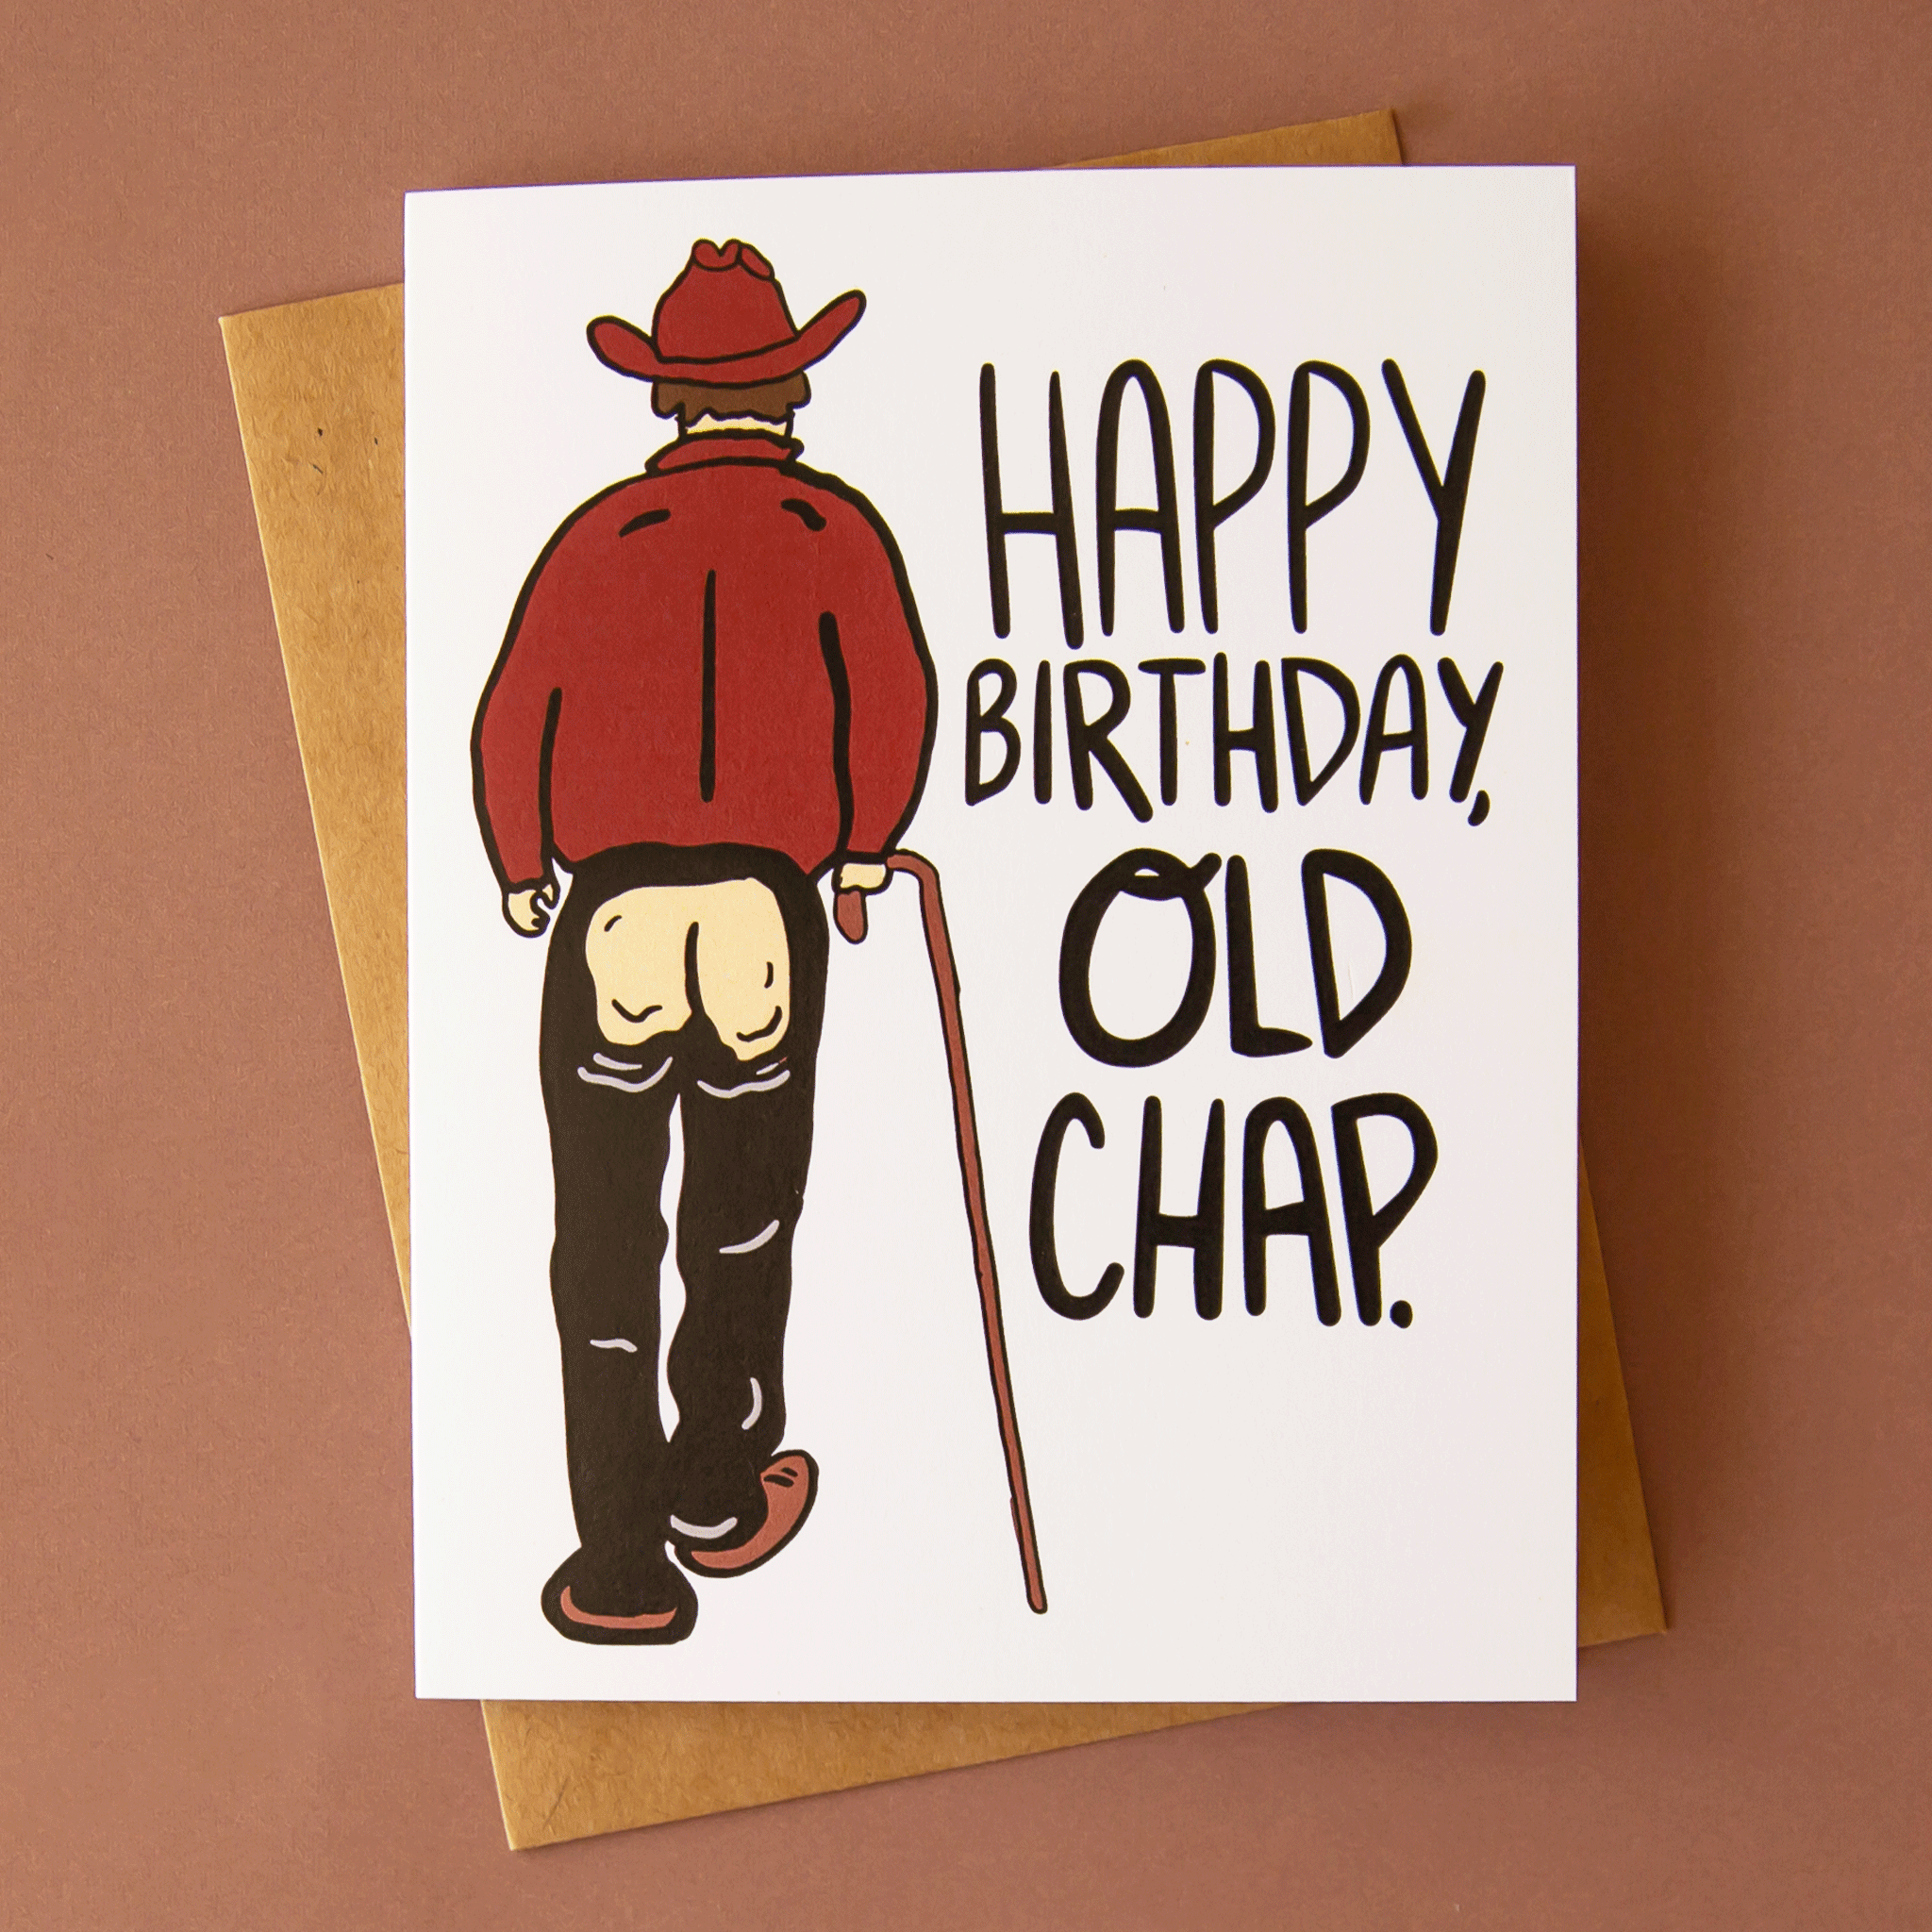 On a brown background is a white card with an illustration of a cowboy with chaps on and an open bottom area along with black text to the right that reads, "Happy Birthday Old Chap".